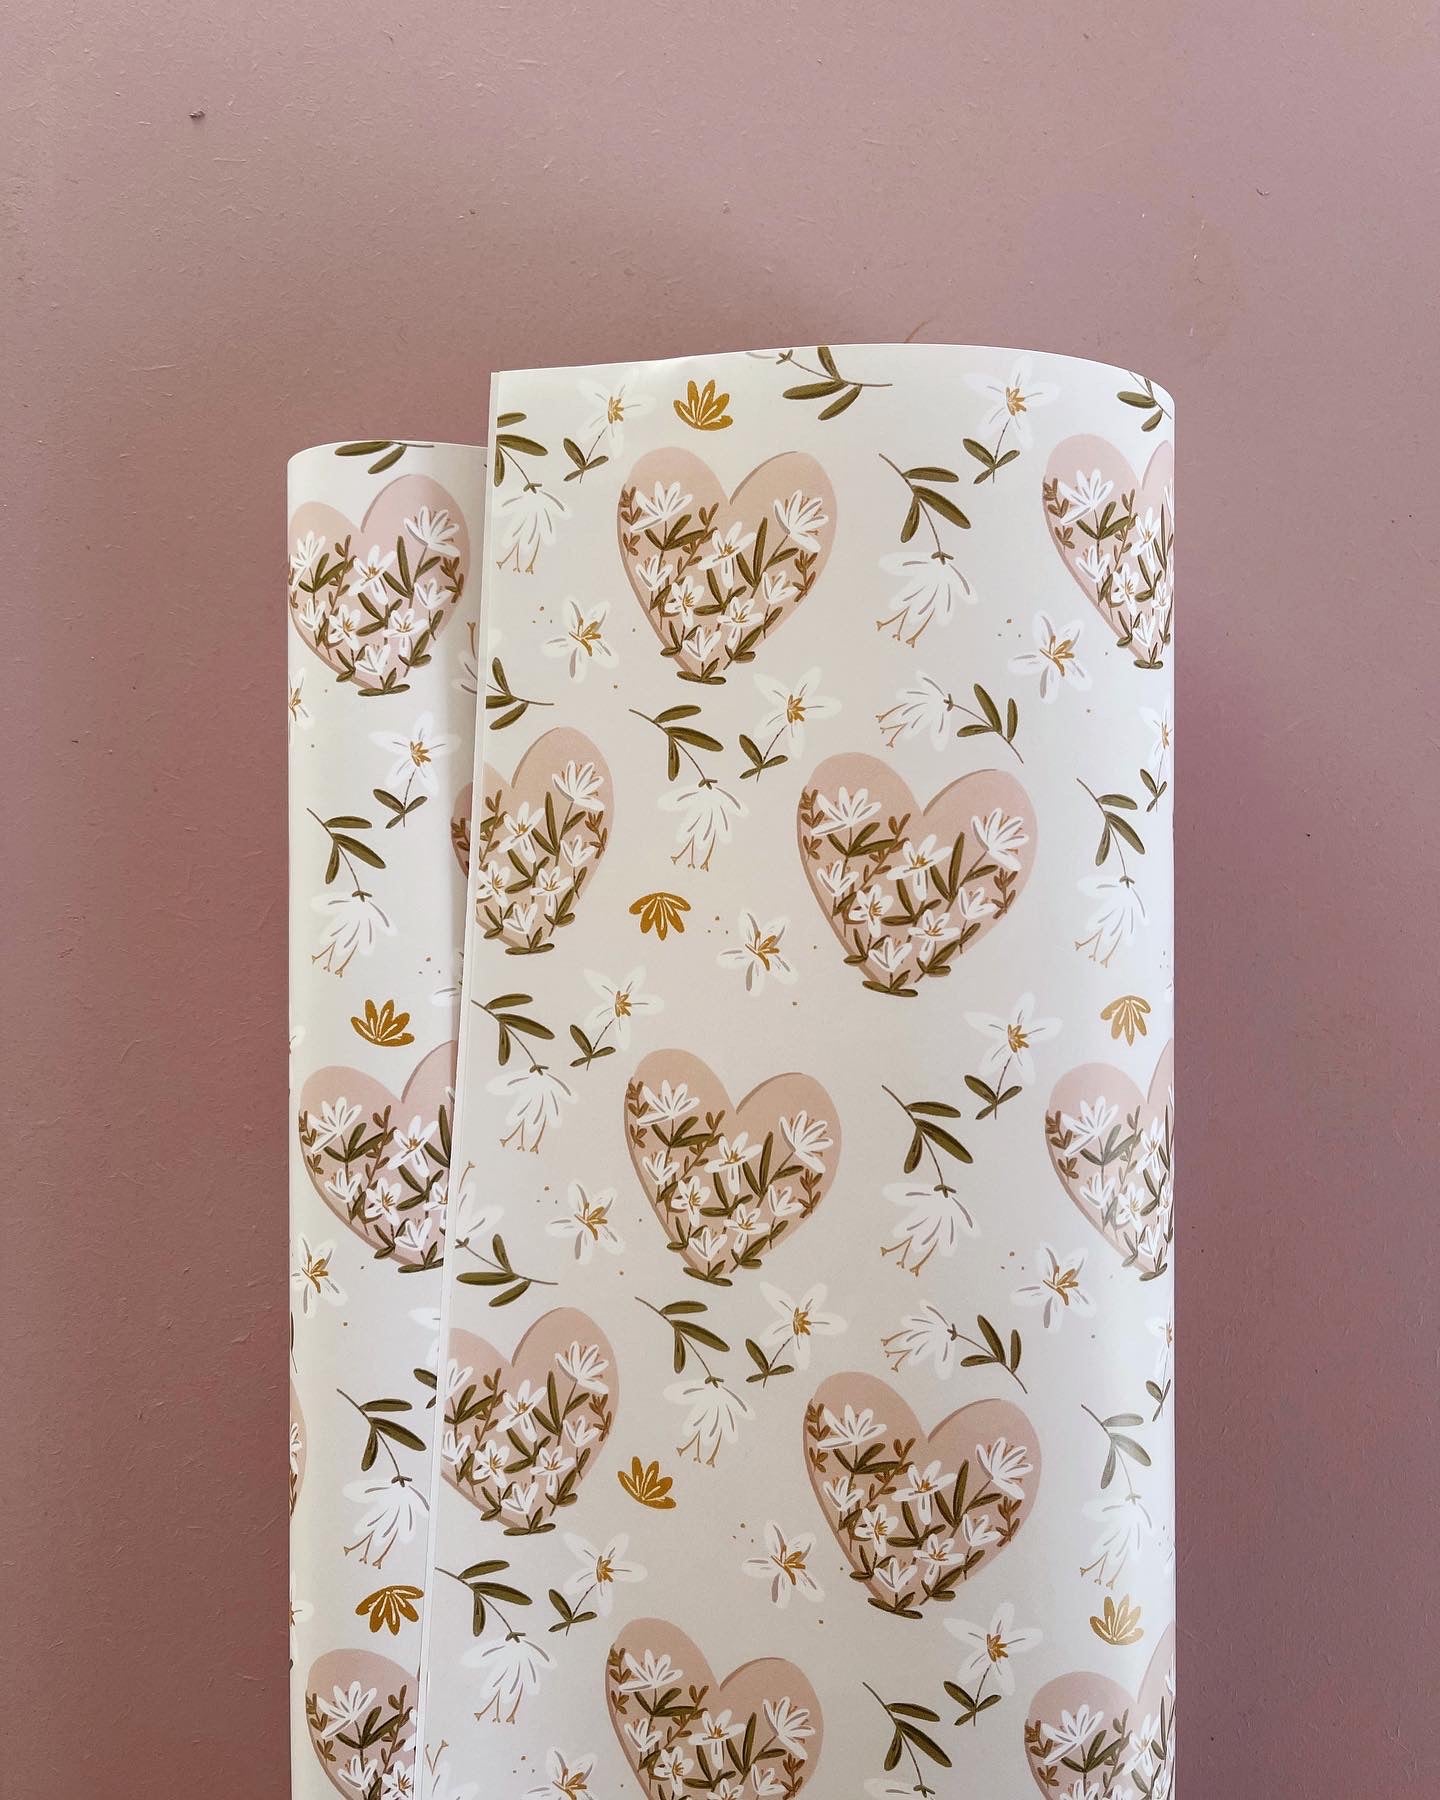 Heart Daisy Wrapping Paper